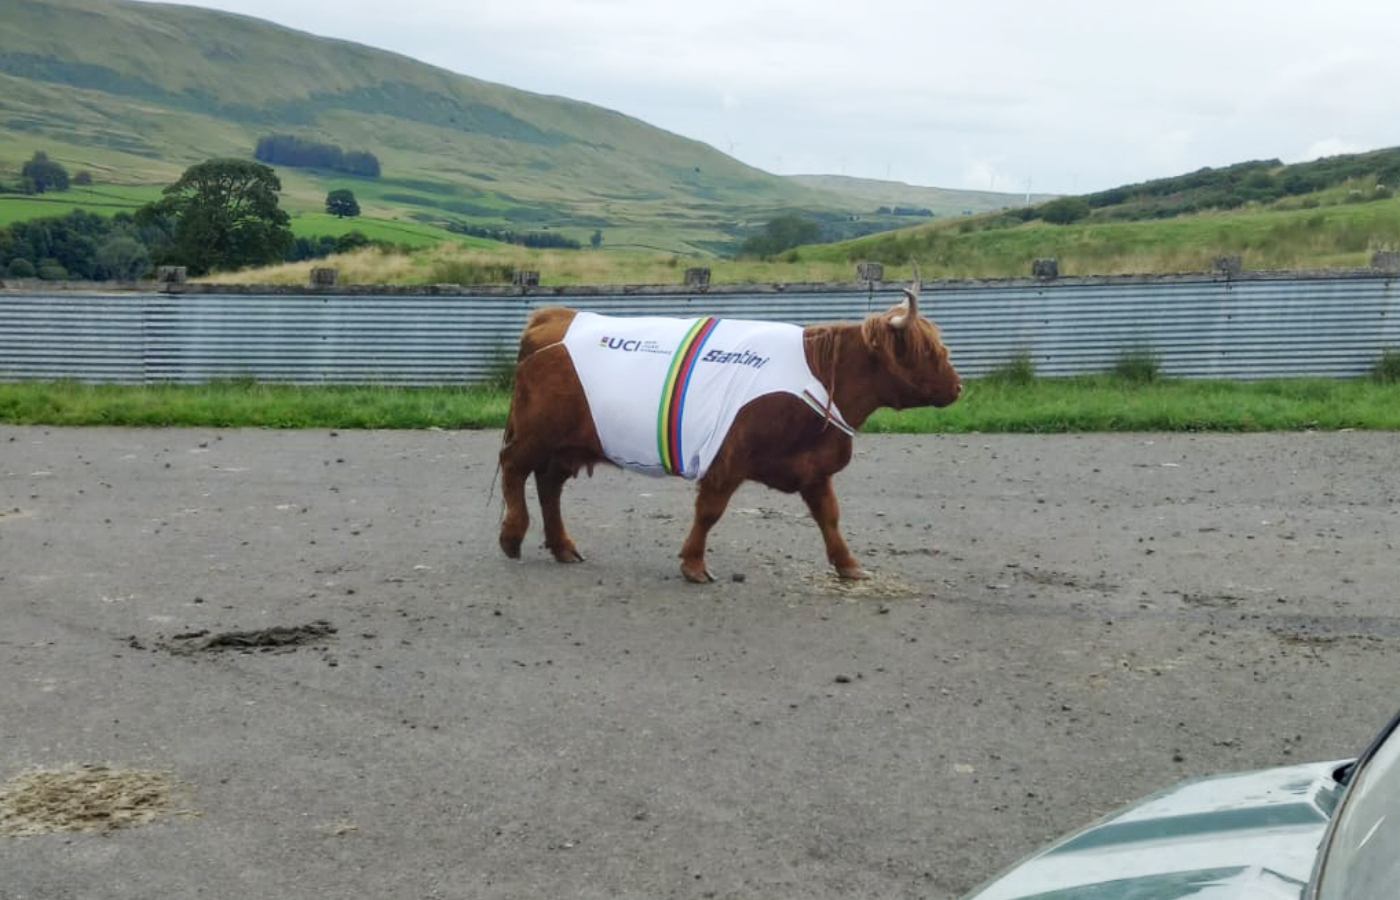 A Highland cow wearing a cycling jersey for the UCI.